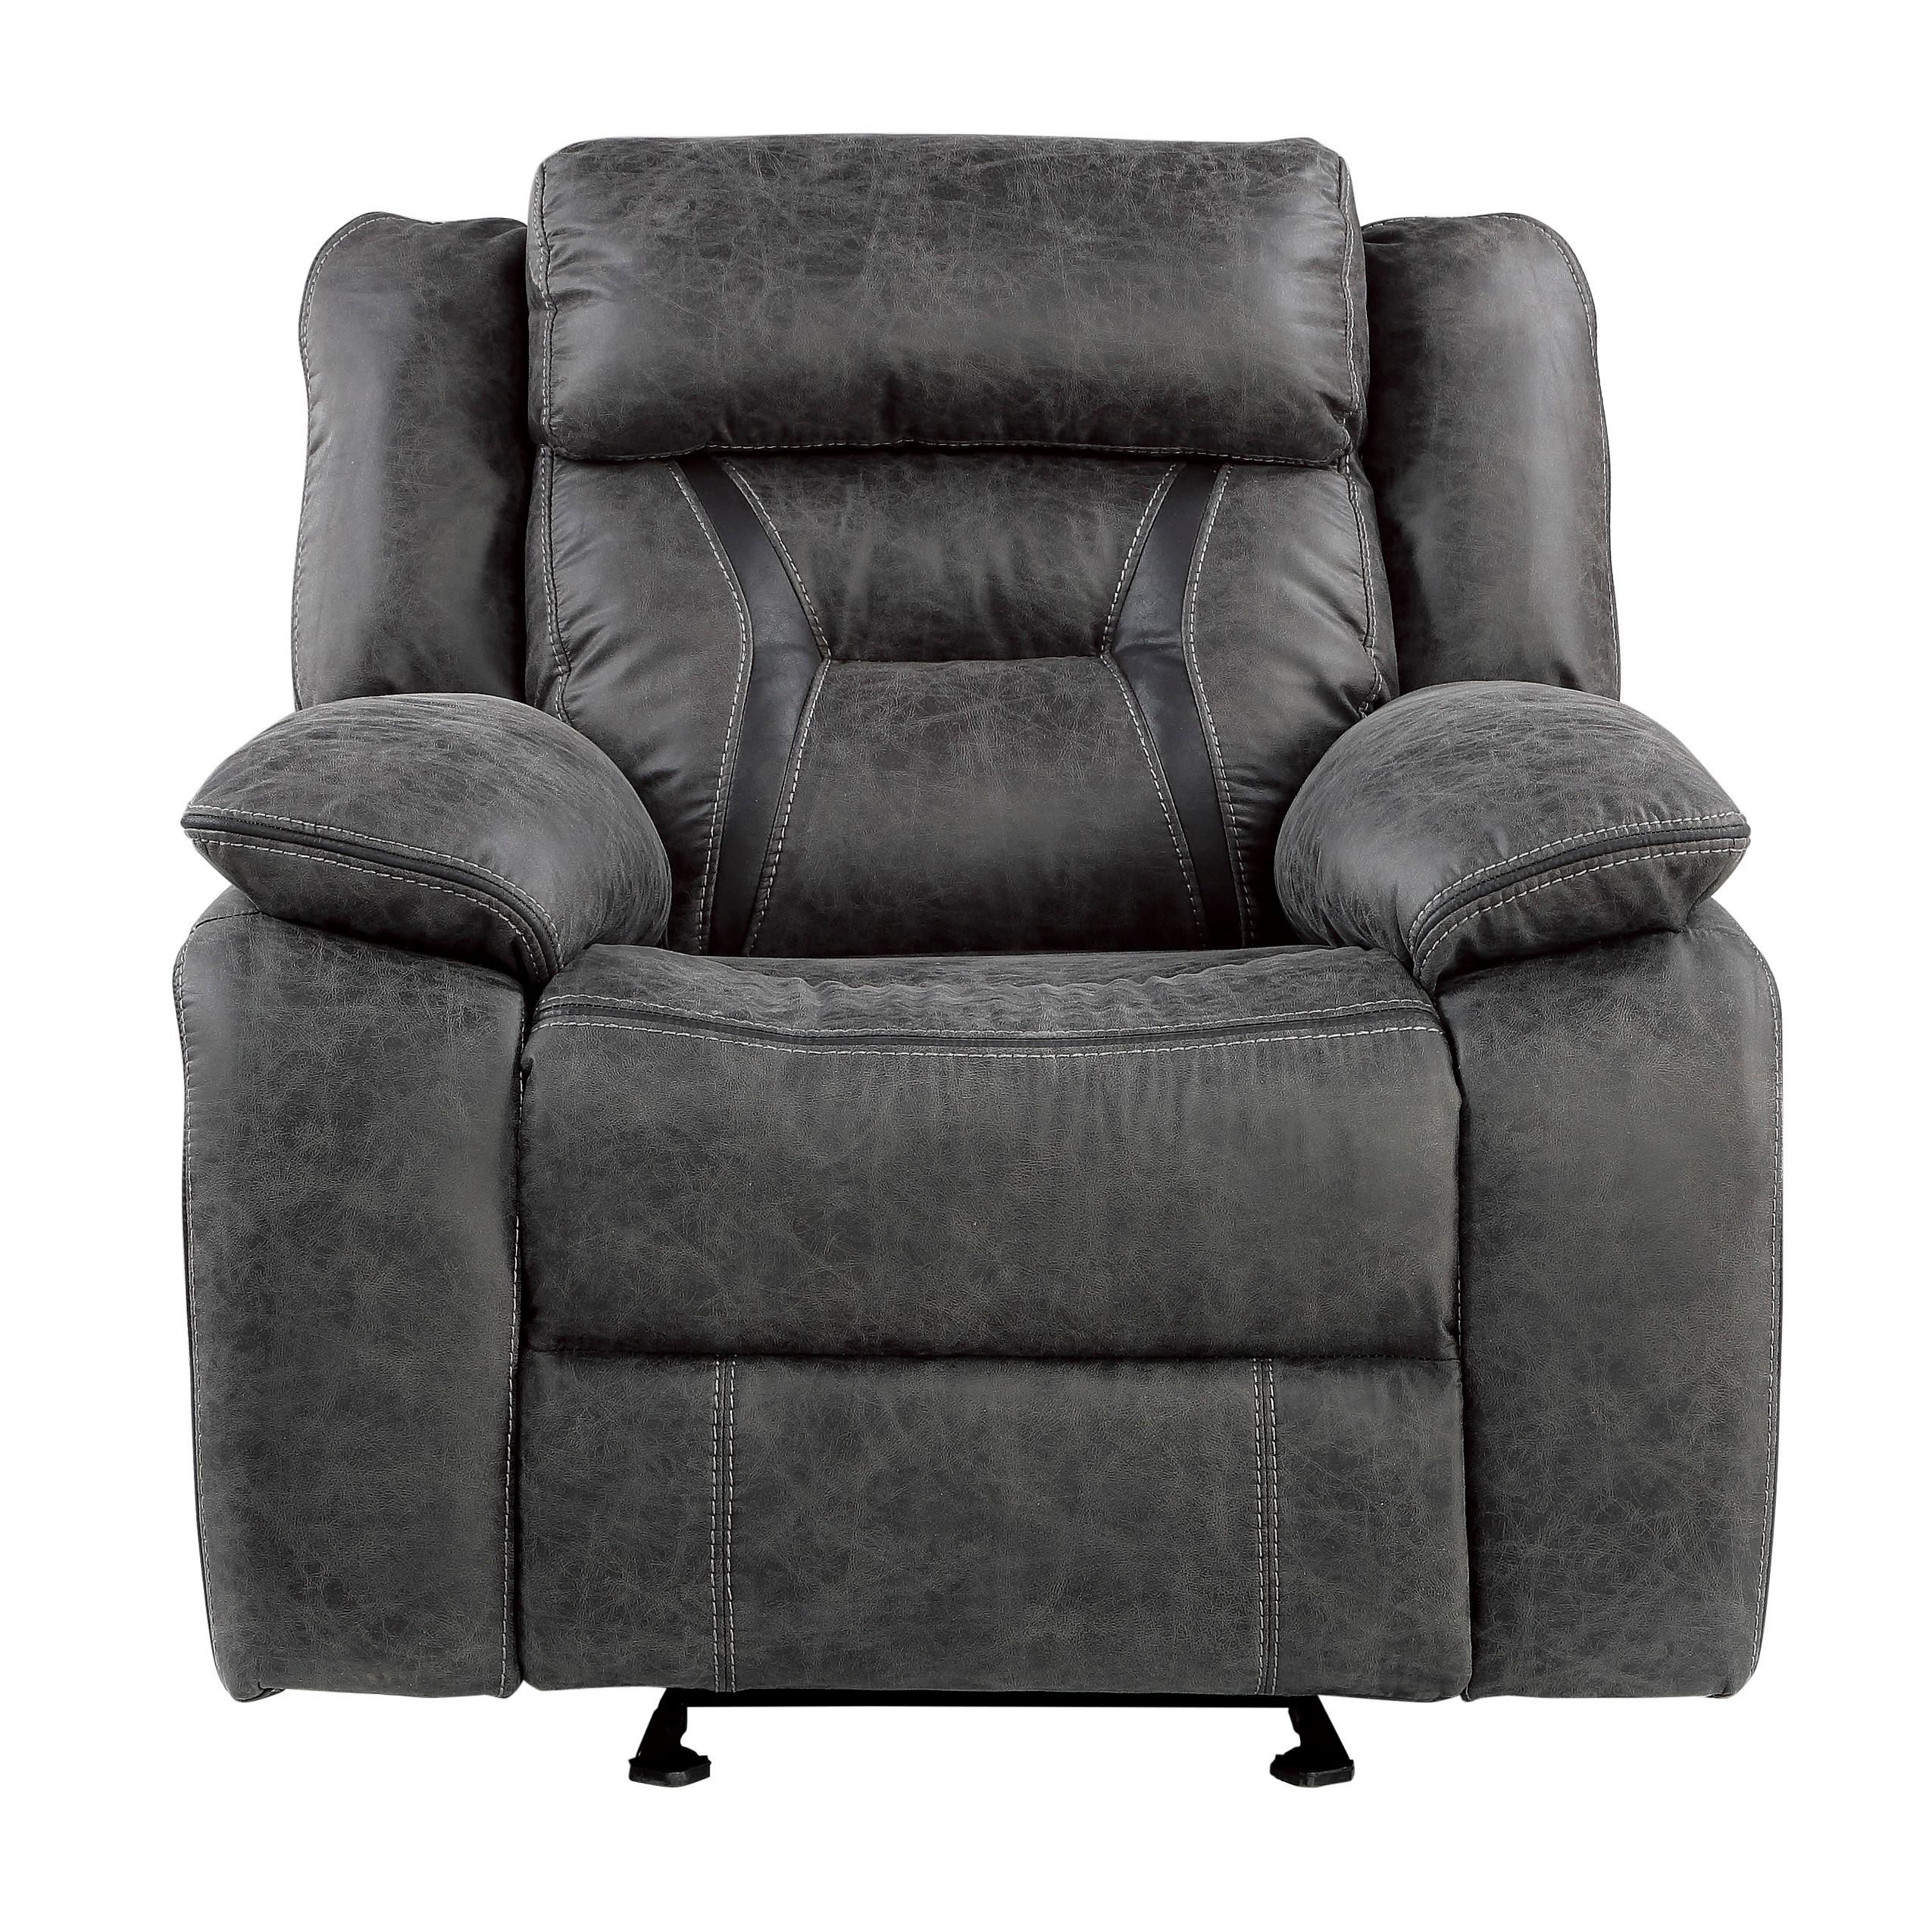 Modern Reclining Chair 9989GY-1 Madrona Hill 9989GY-1 in Gray Microfiber